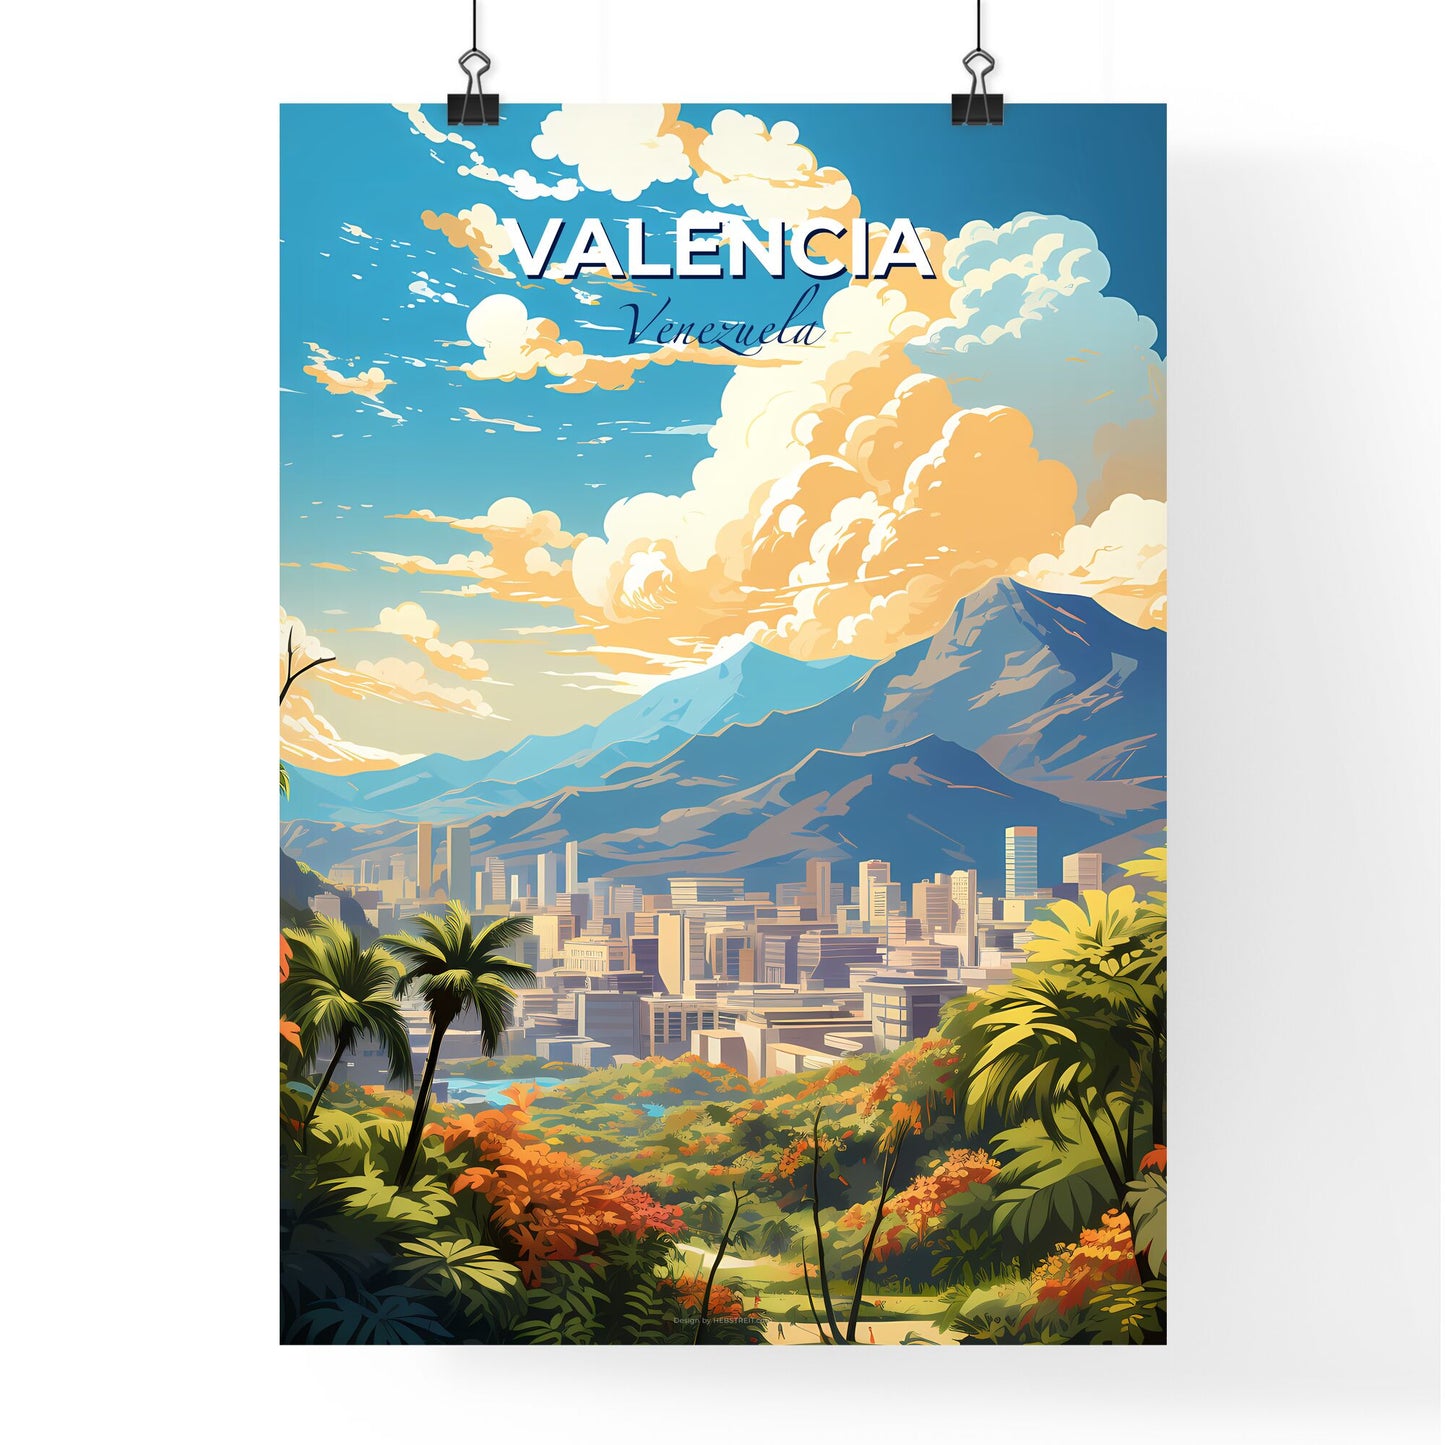 Valencia Venezuela Skyline - A Landscape Of A City With Trees And Mountains - Customizable Travel Gift Default Title